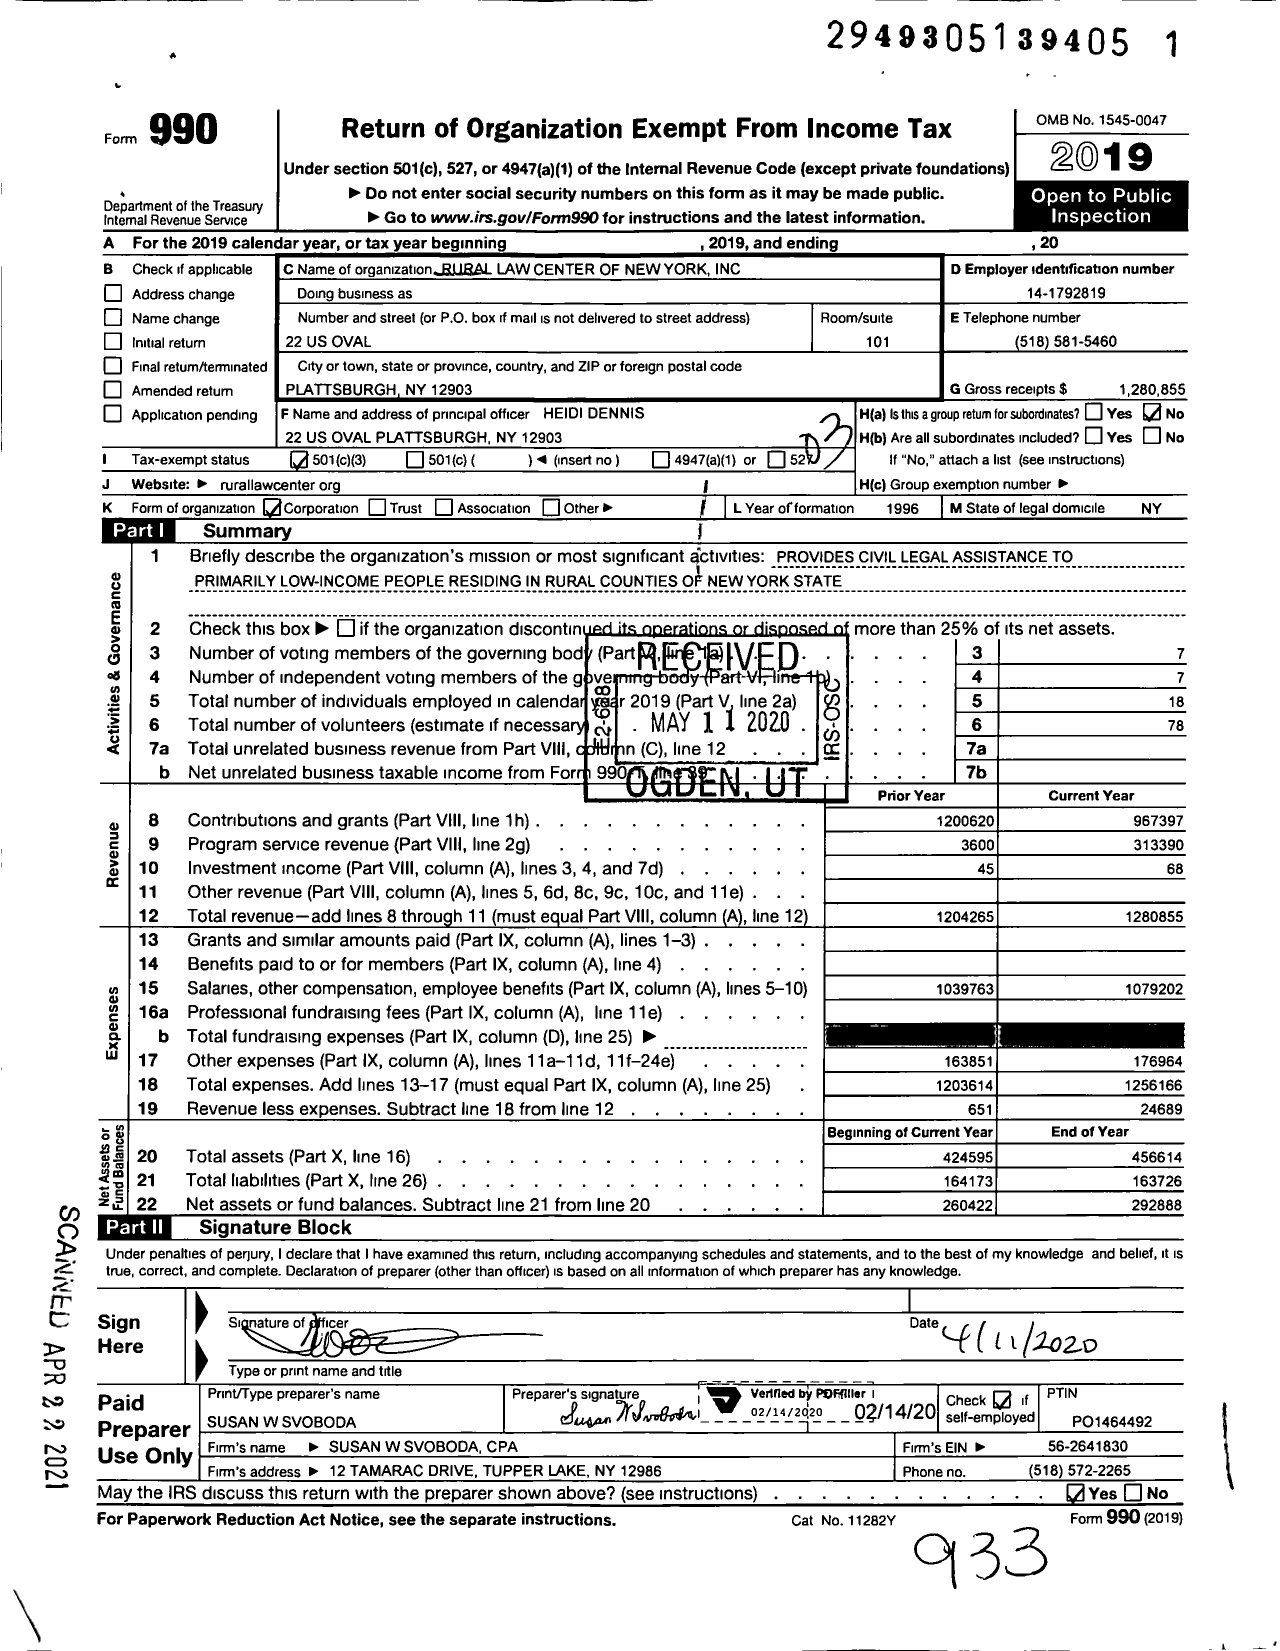 Image of first page of 2019 Form 990 for Rural Law Center of New York